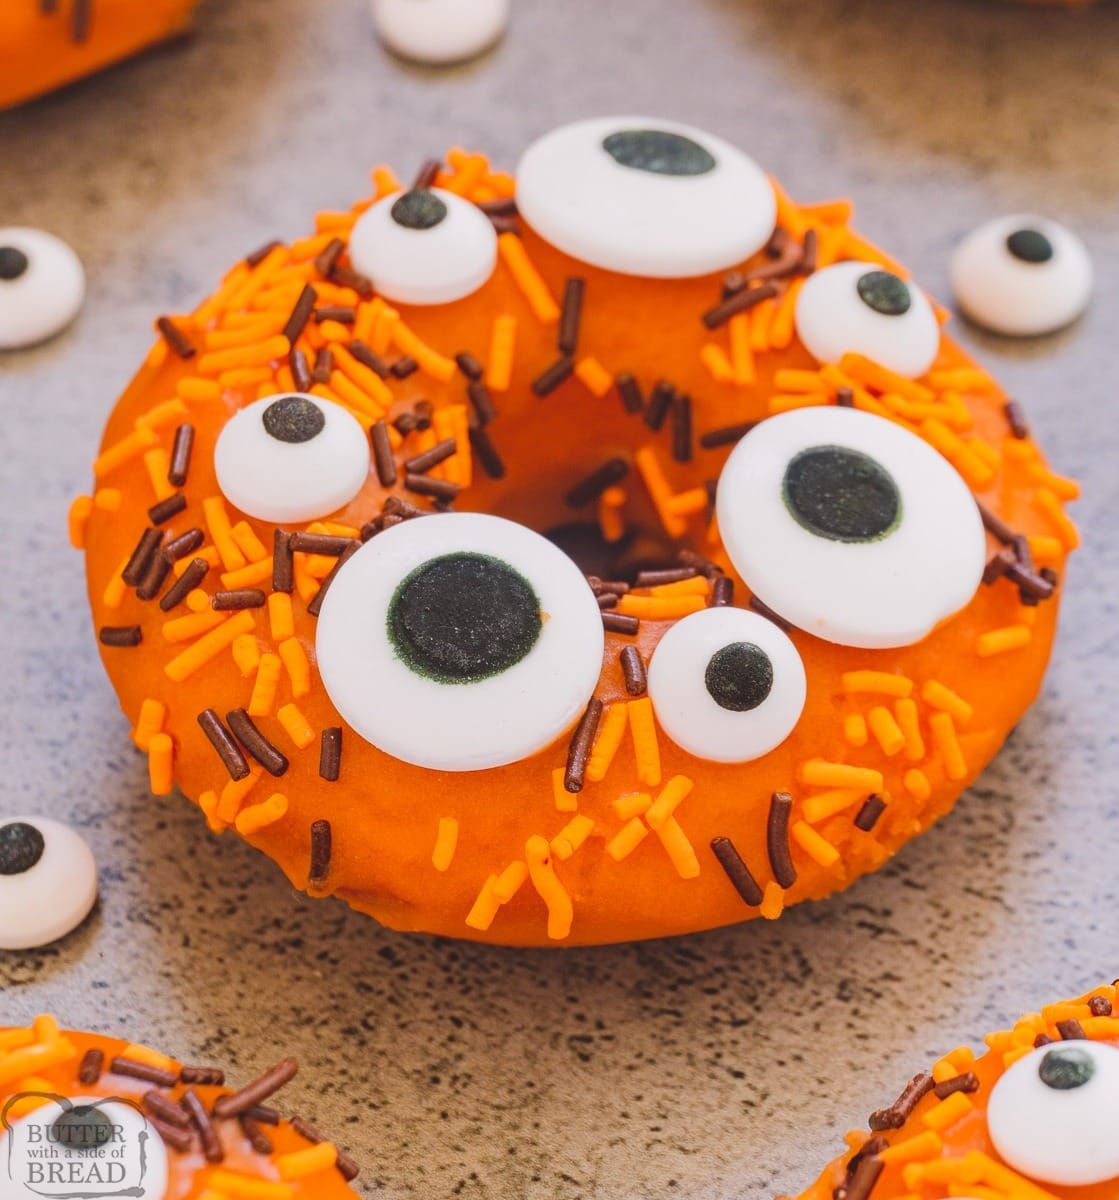 Orange colored donut decorated with candy eyes and chocolate and orange sprinkles. 